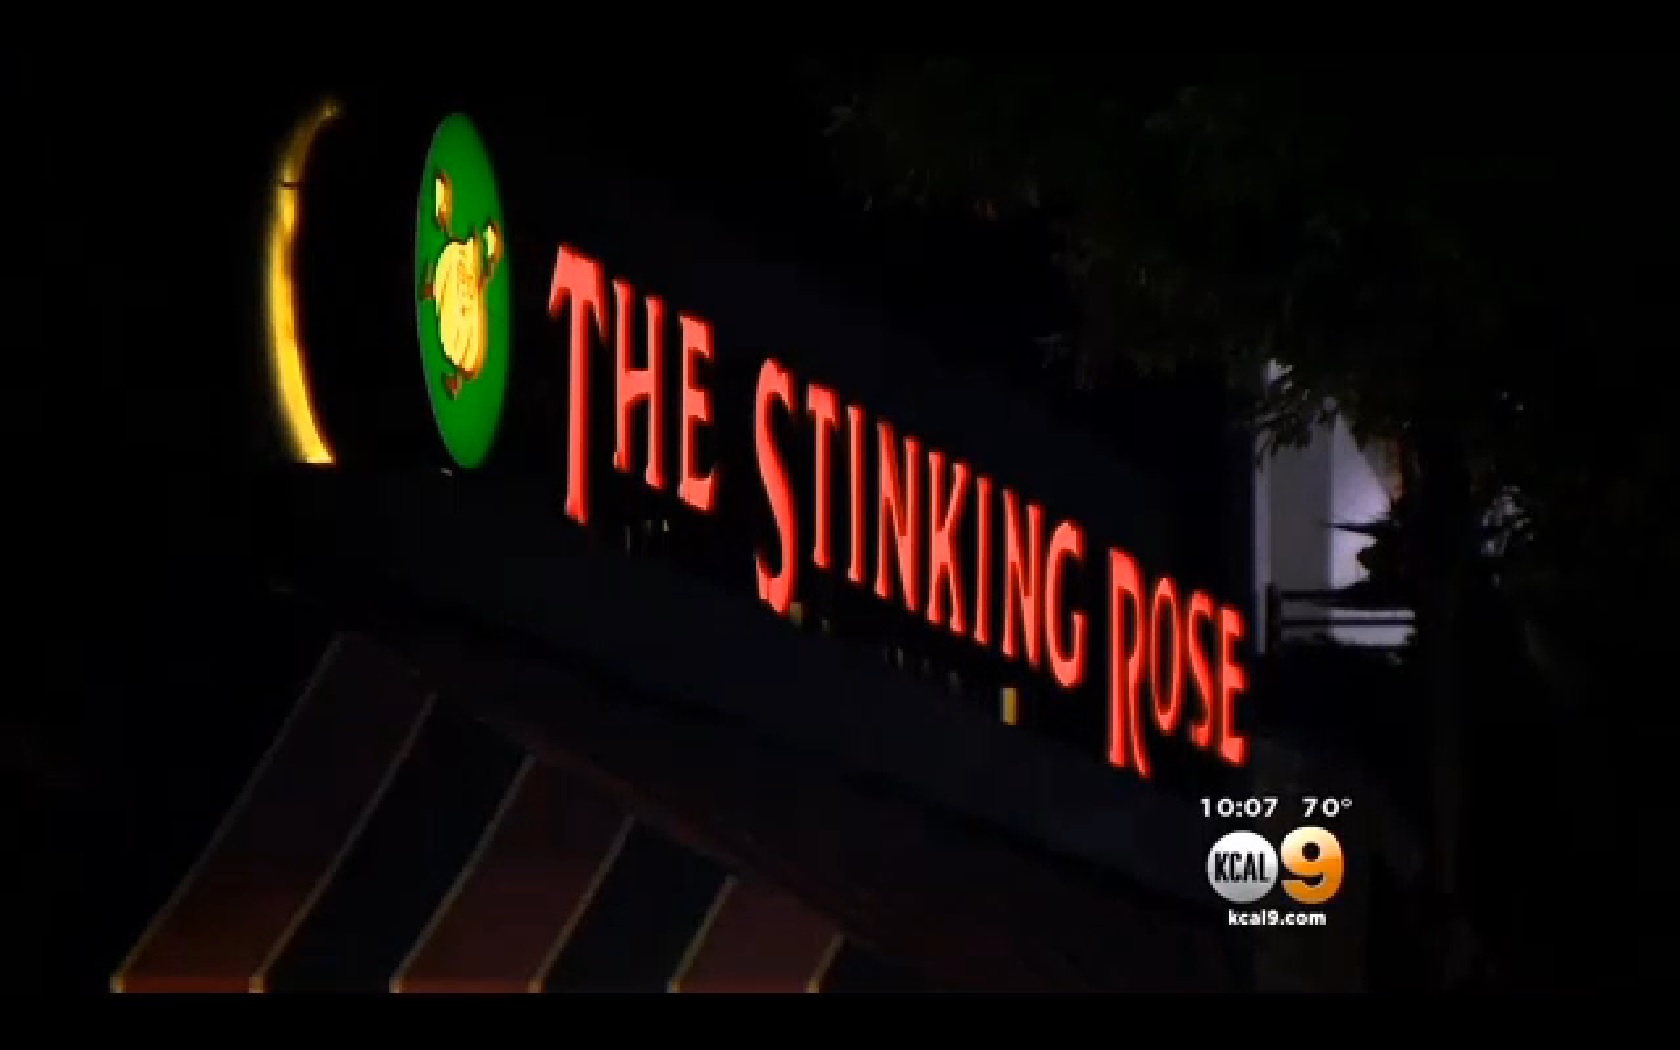 Beverly Hills Parking Valet Struck By Mercedes At The Stinking Rose Restaurant Driver Sought Say Police Cbs News